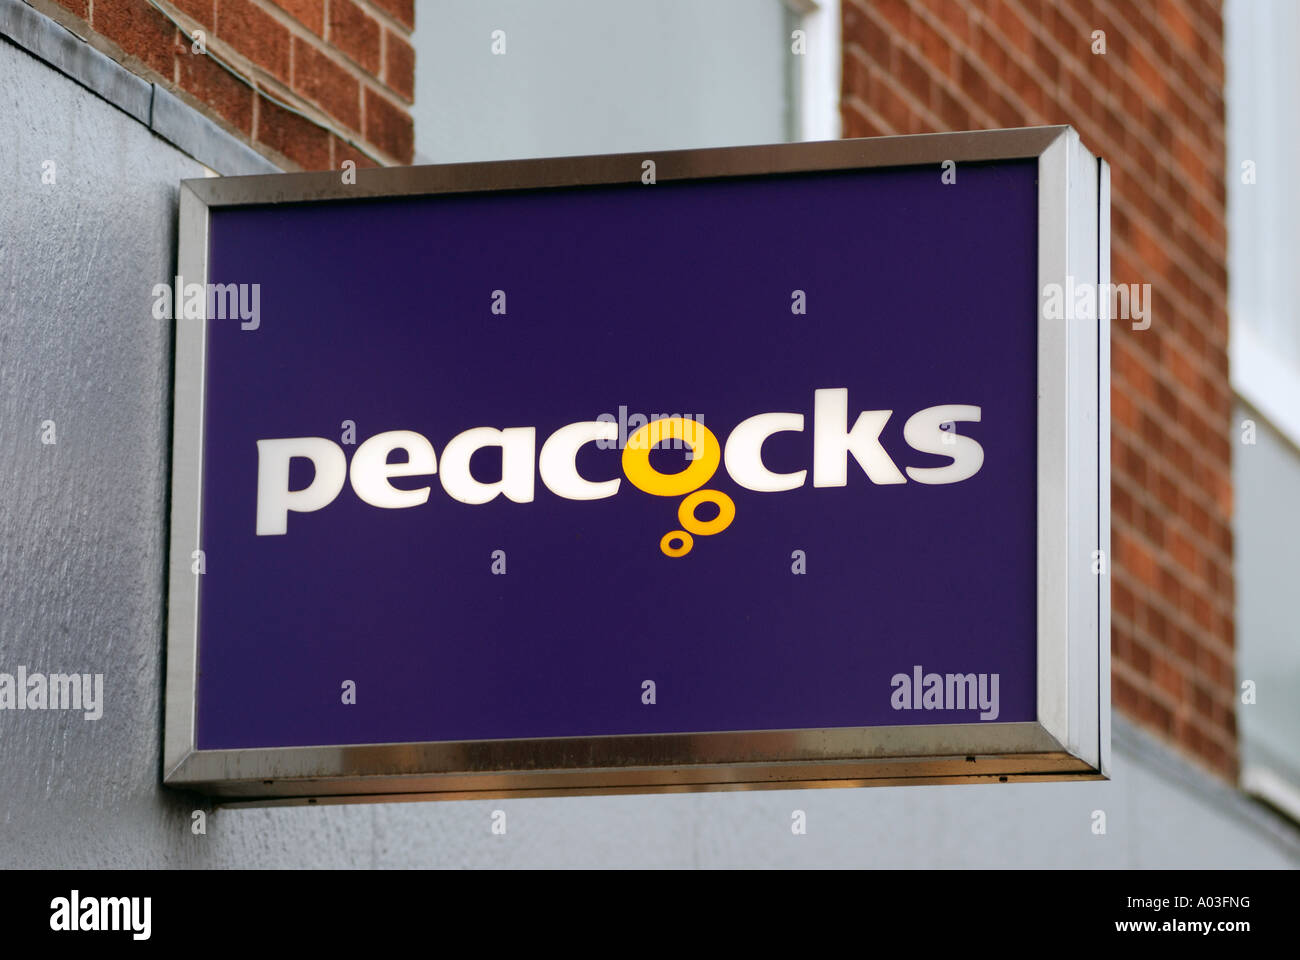 Peacocks clothes store sign, UK Stock Photo